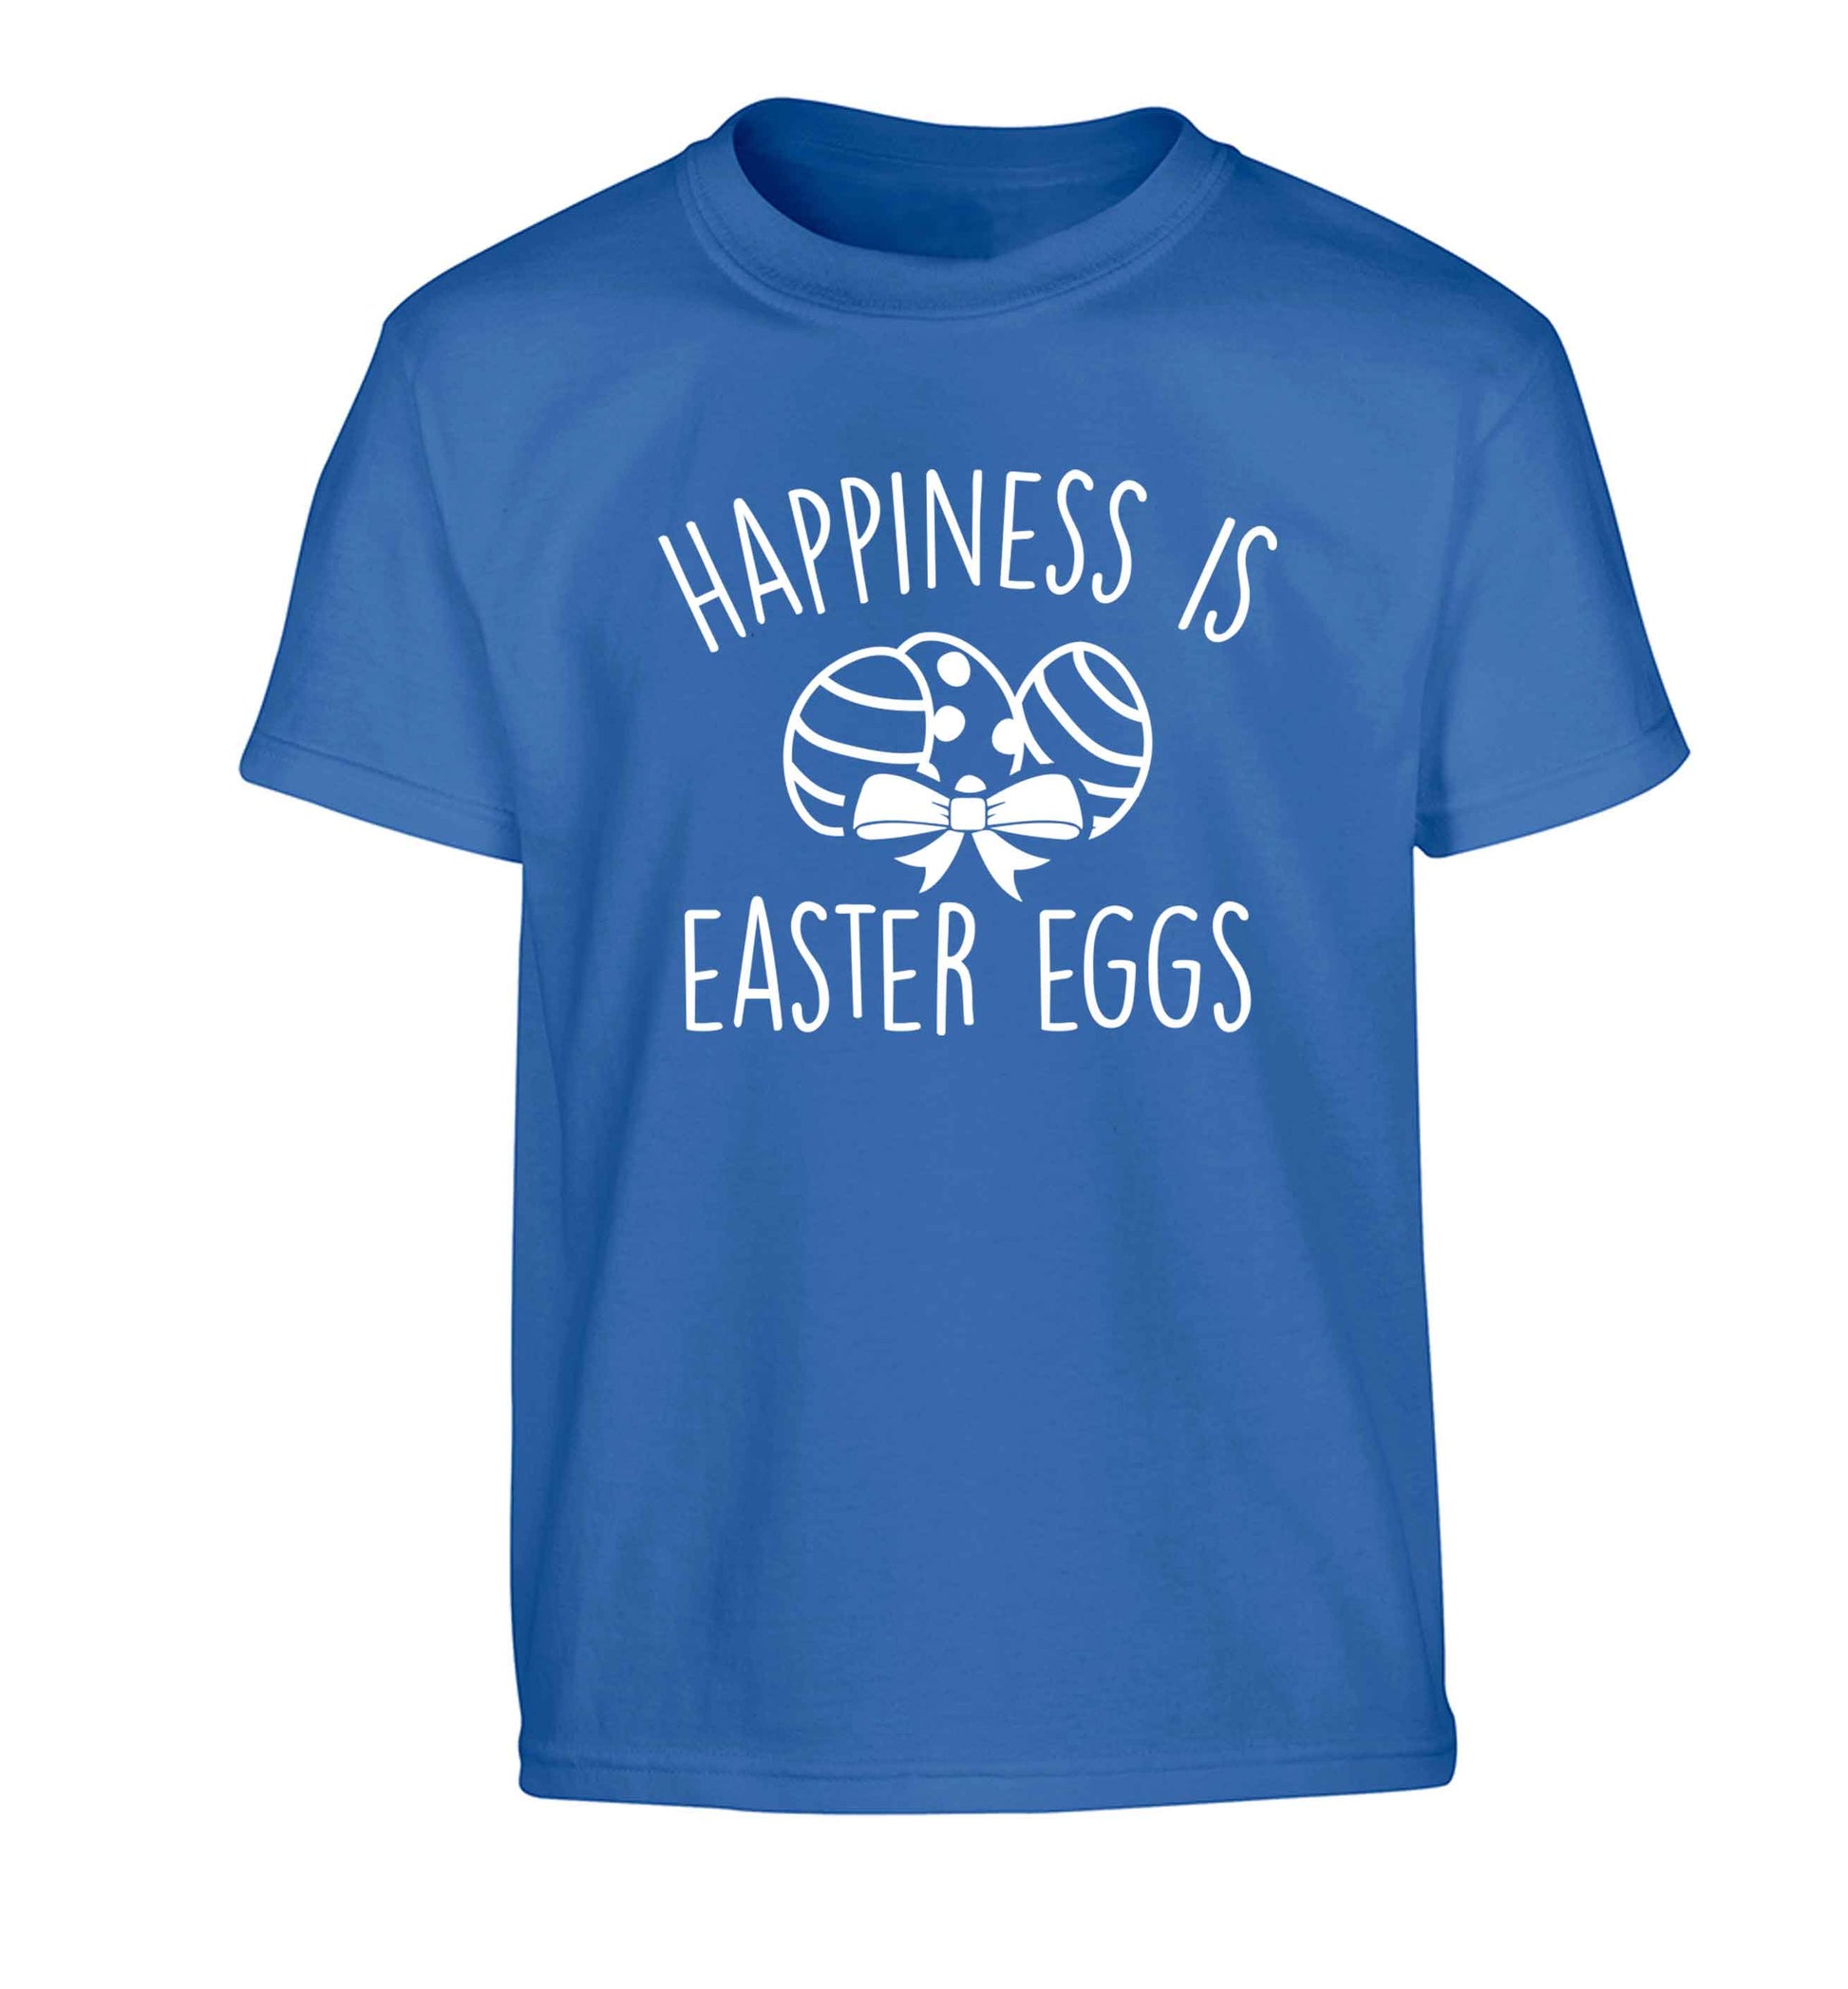 Happiness is Easter eggs Children's blue Tshirt 12-13 Years